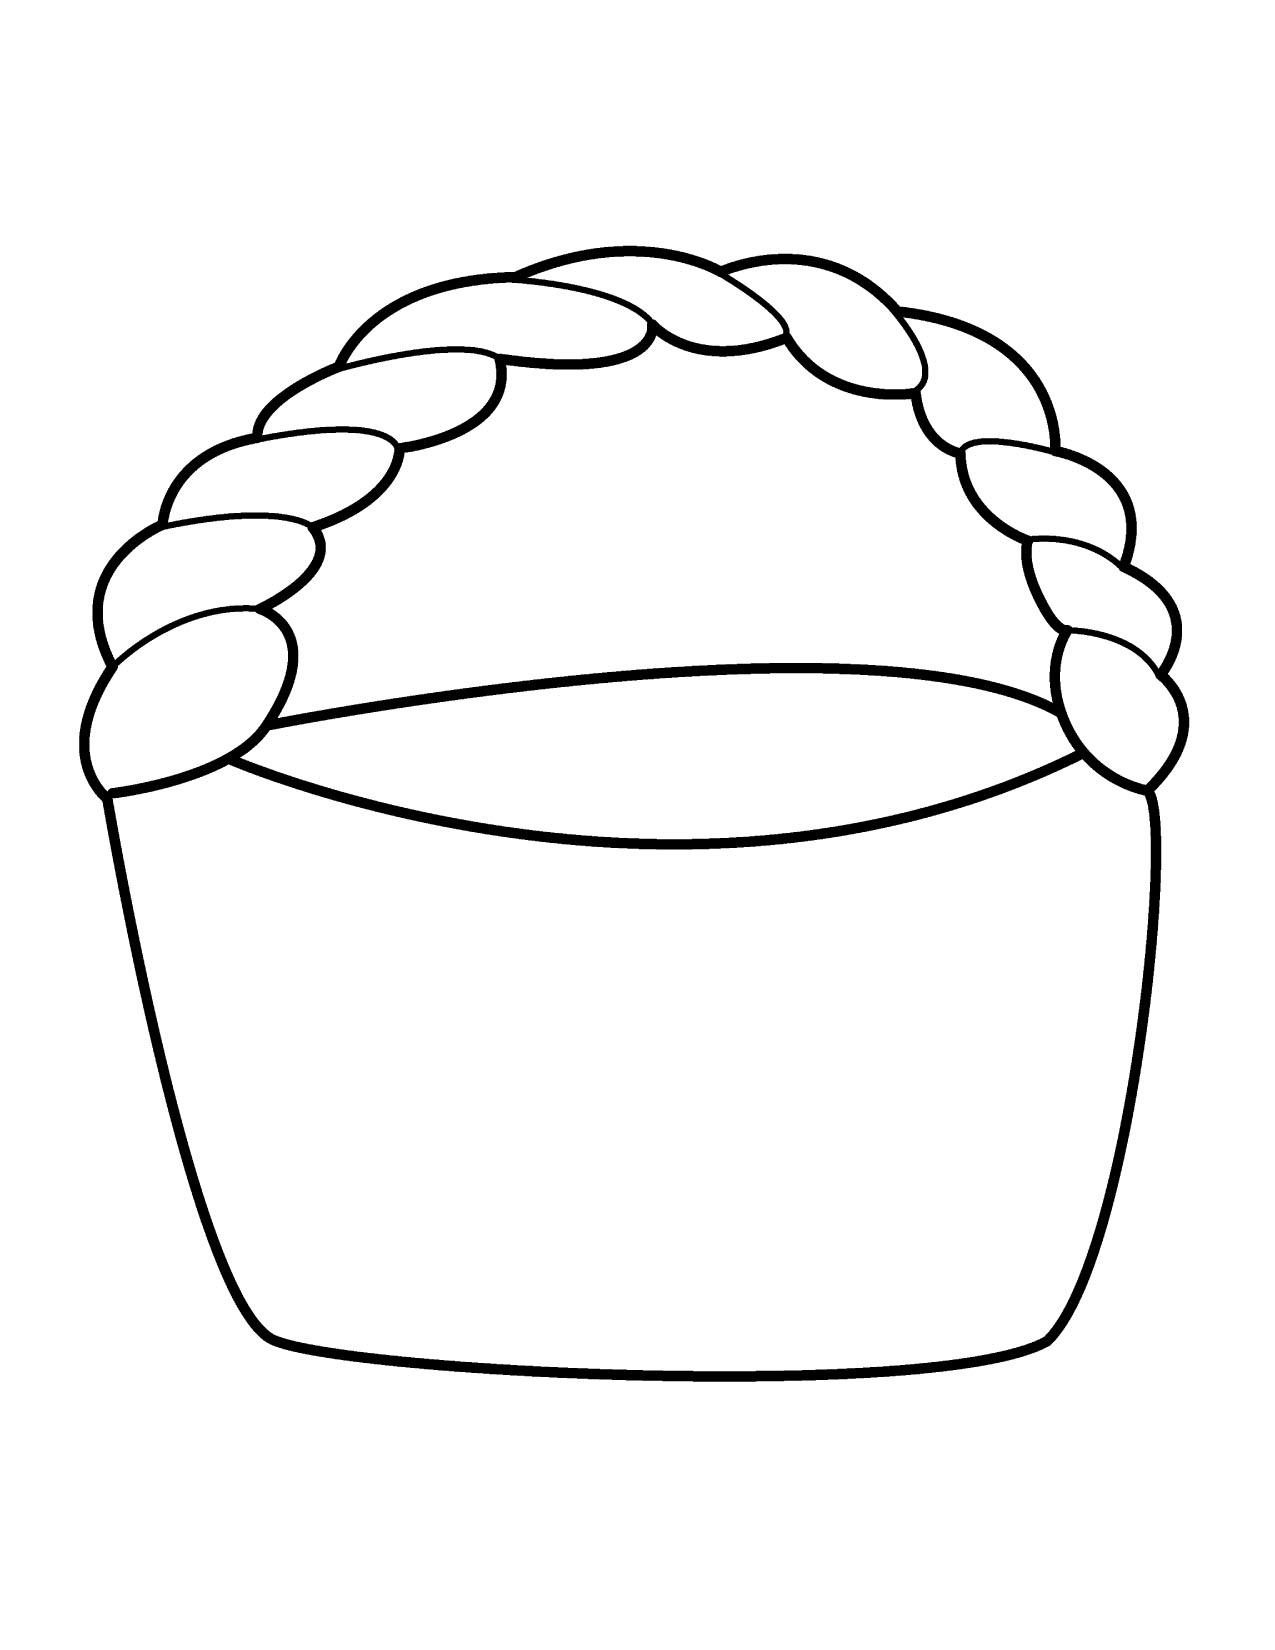 Gift Basket Clipart - Free Clipart Images